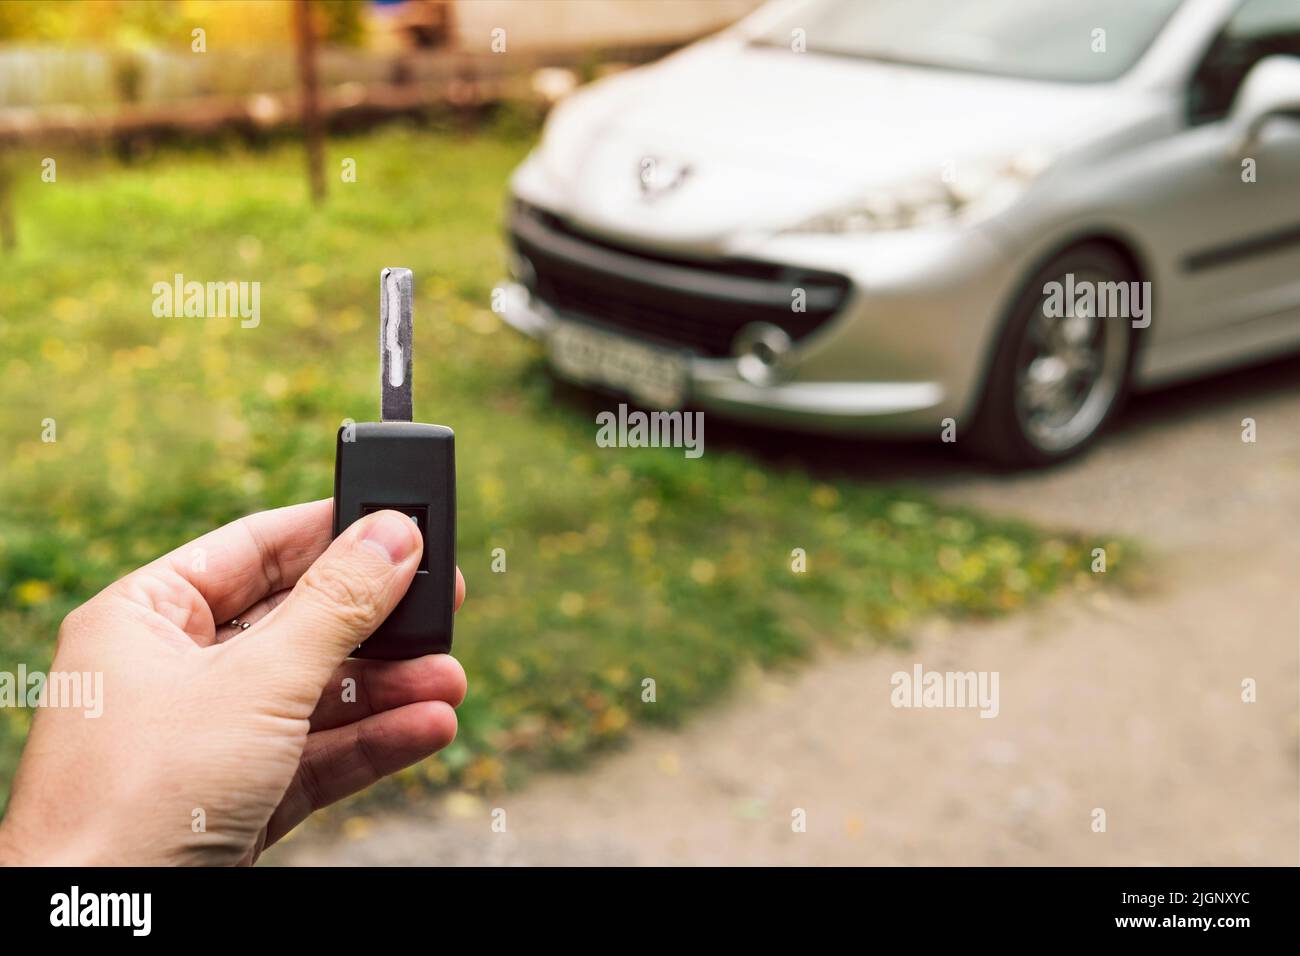 Man's hand pushes a button on the car remote control against parked blurred car. Vehicle key in male hand outsides. Unlocking vehicle by remote key si Stock Photo